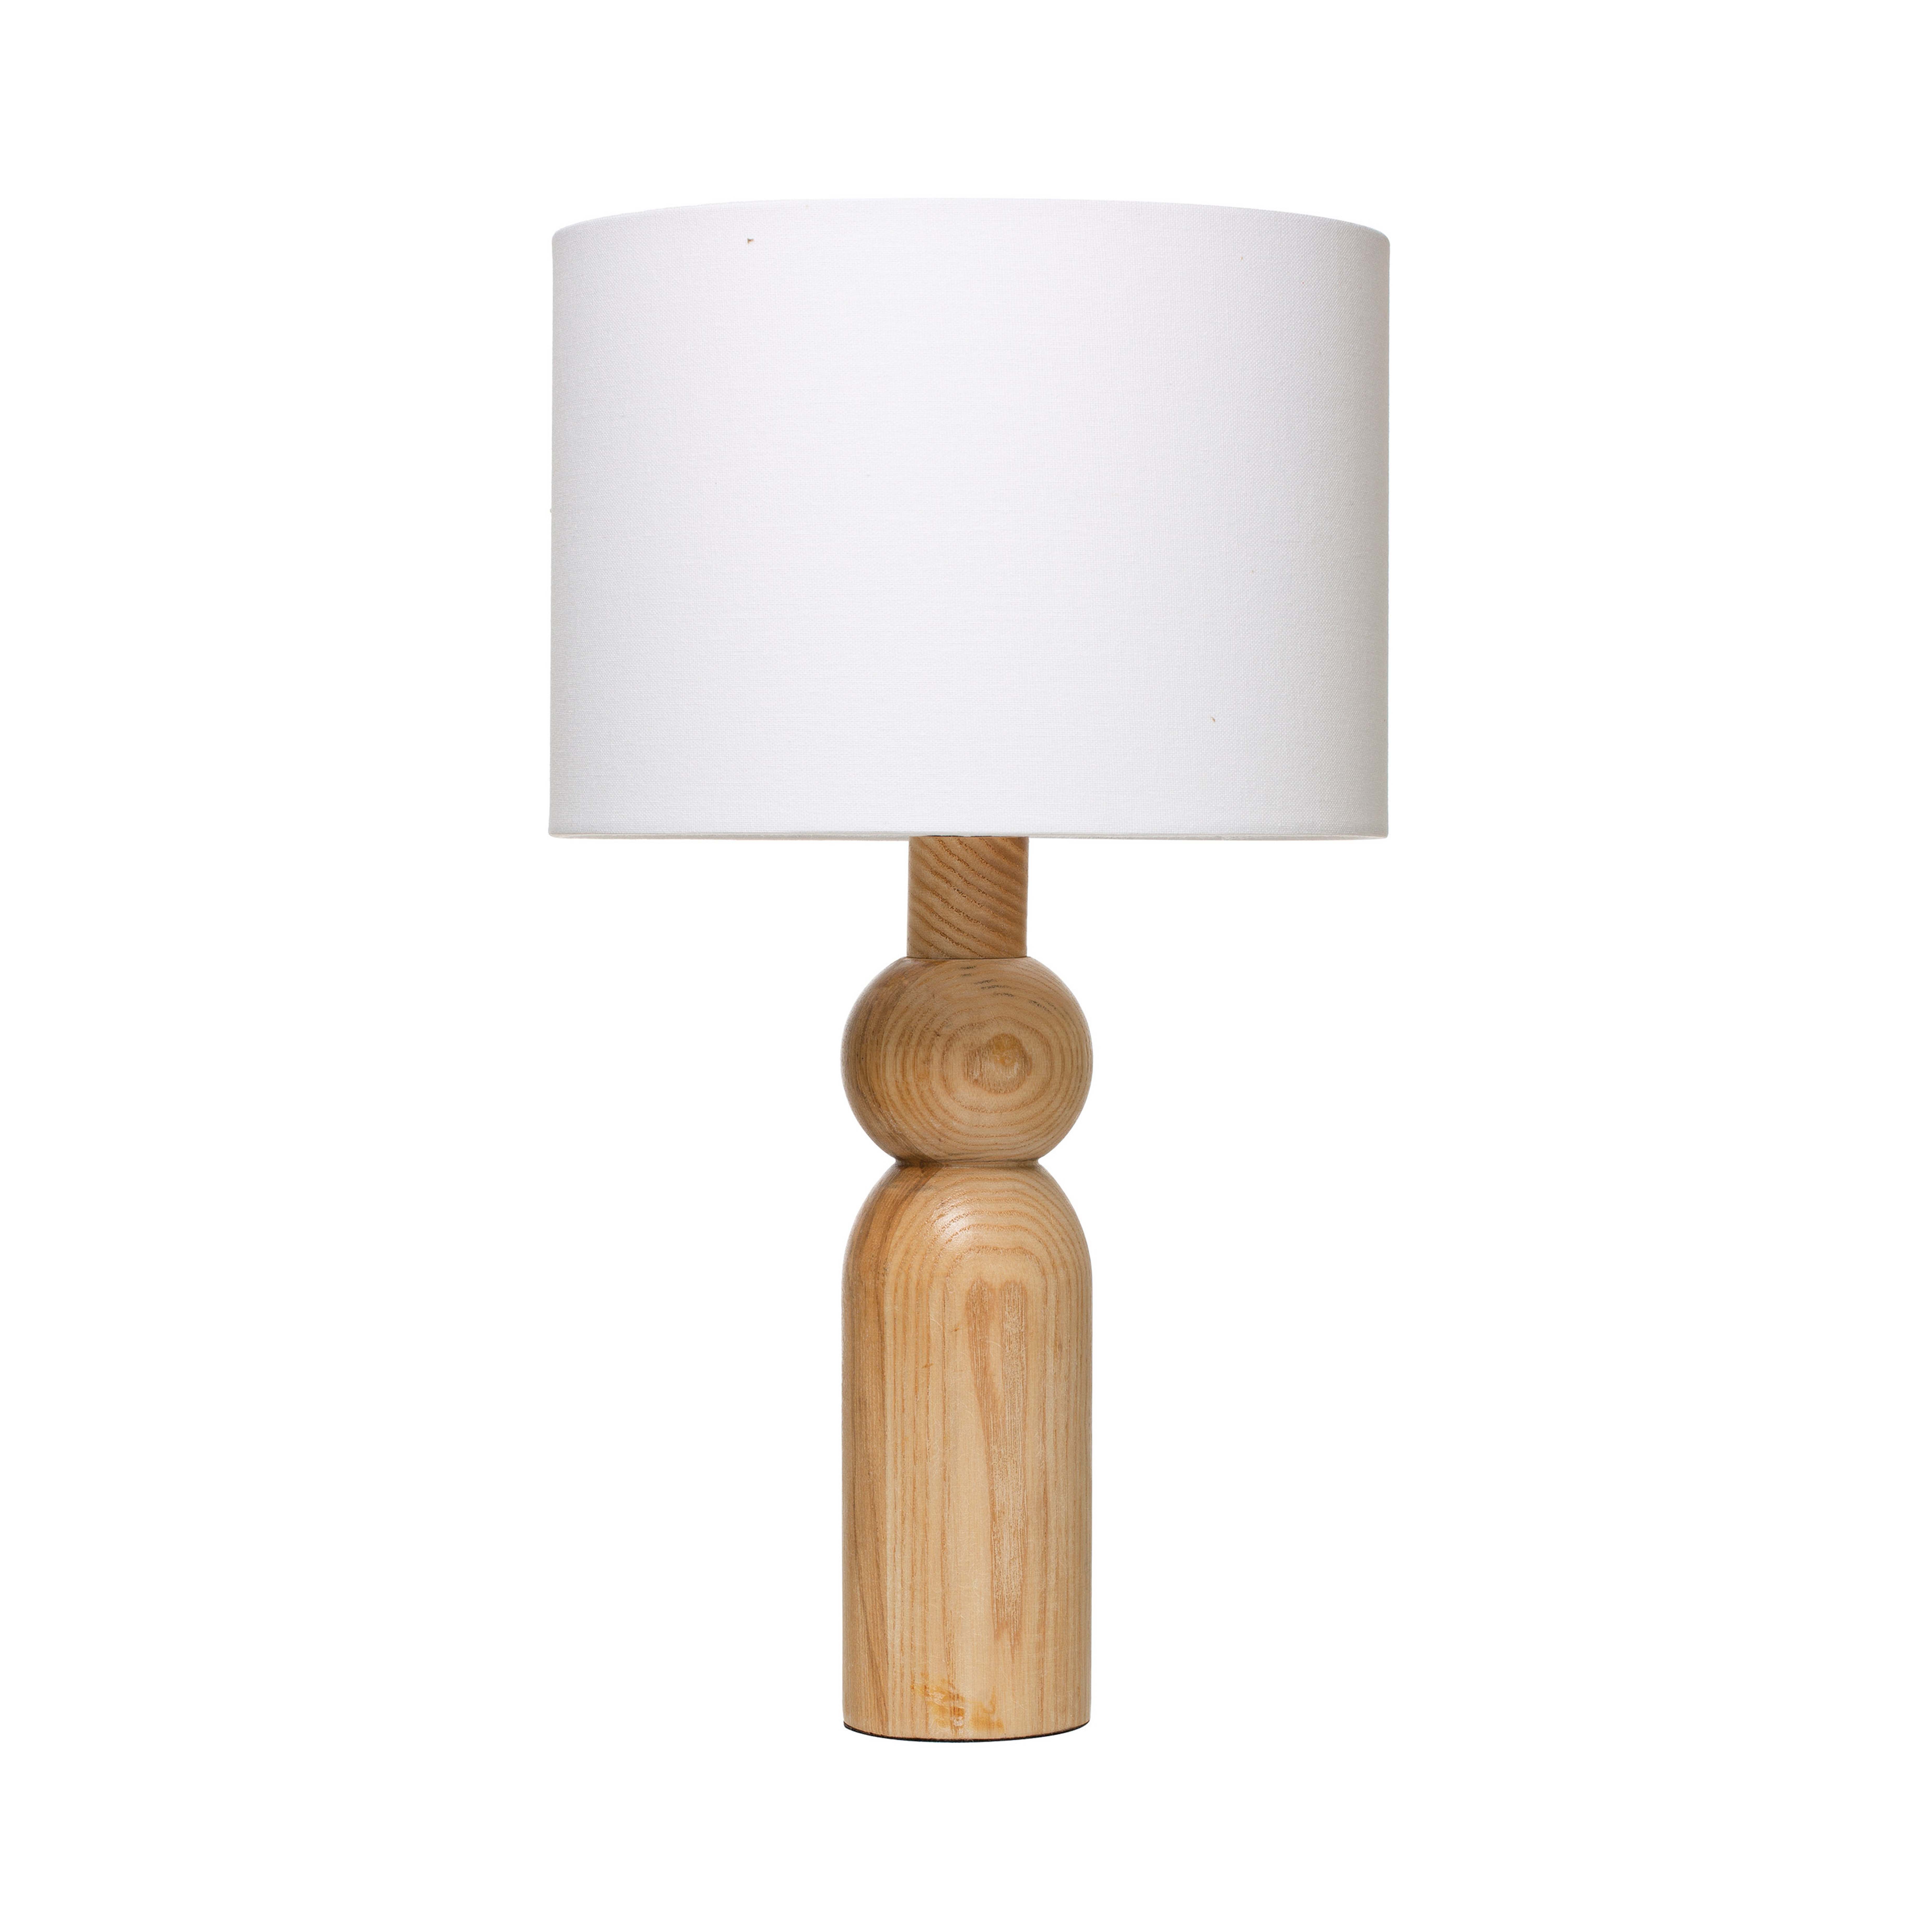 Wood Table Lamp, Natural - Nomad Home